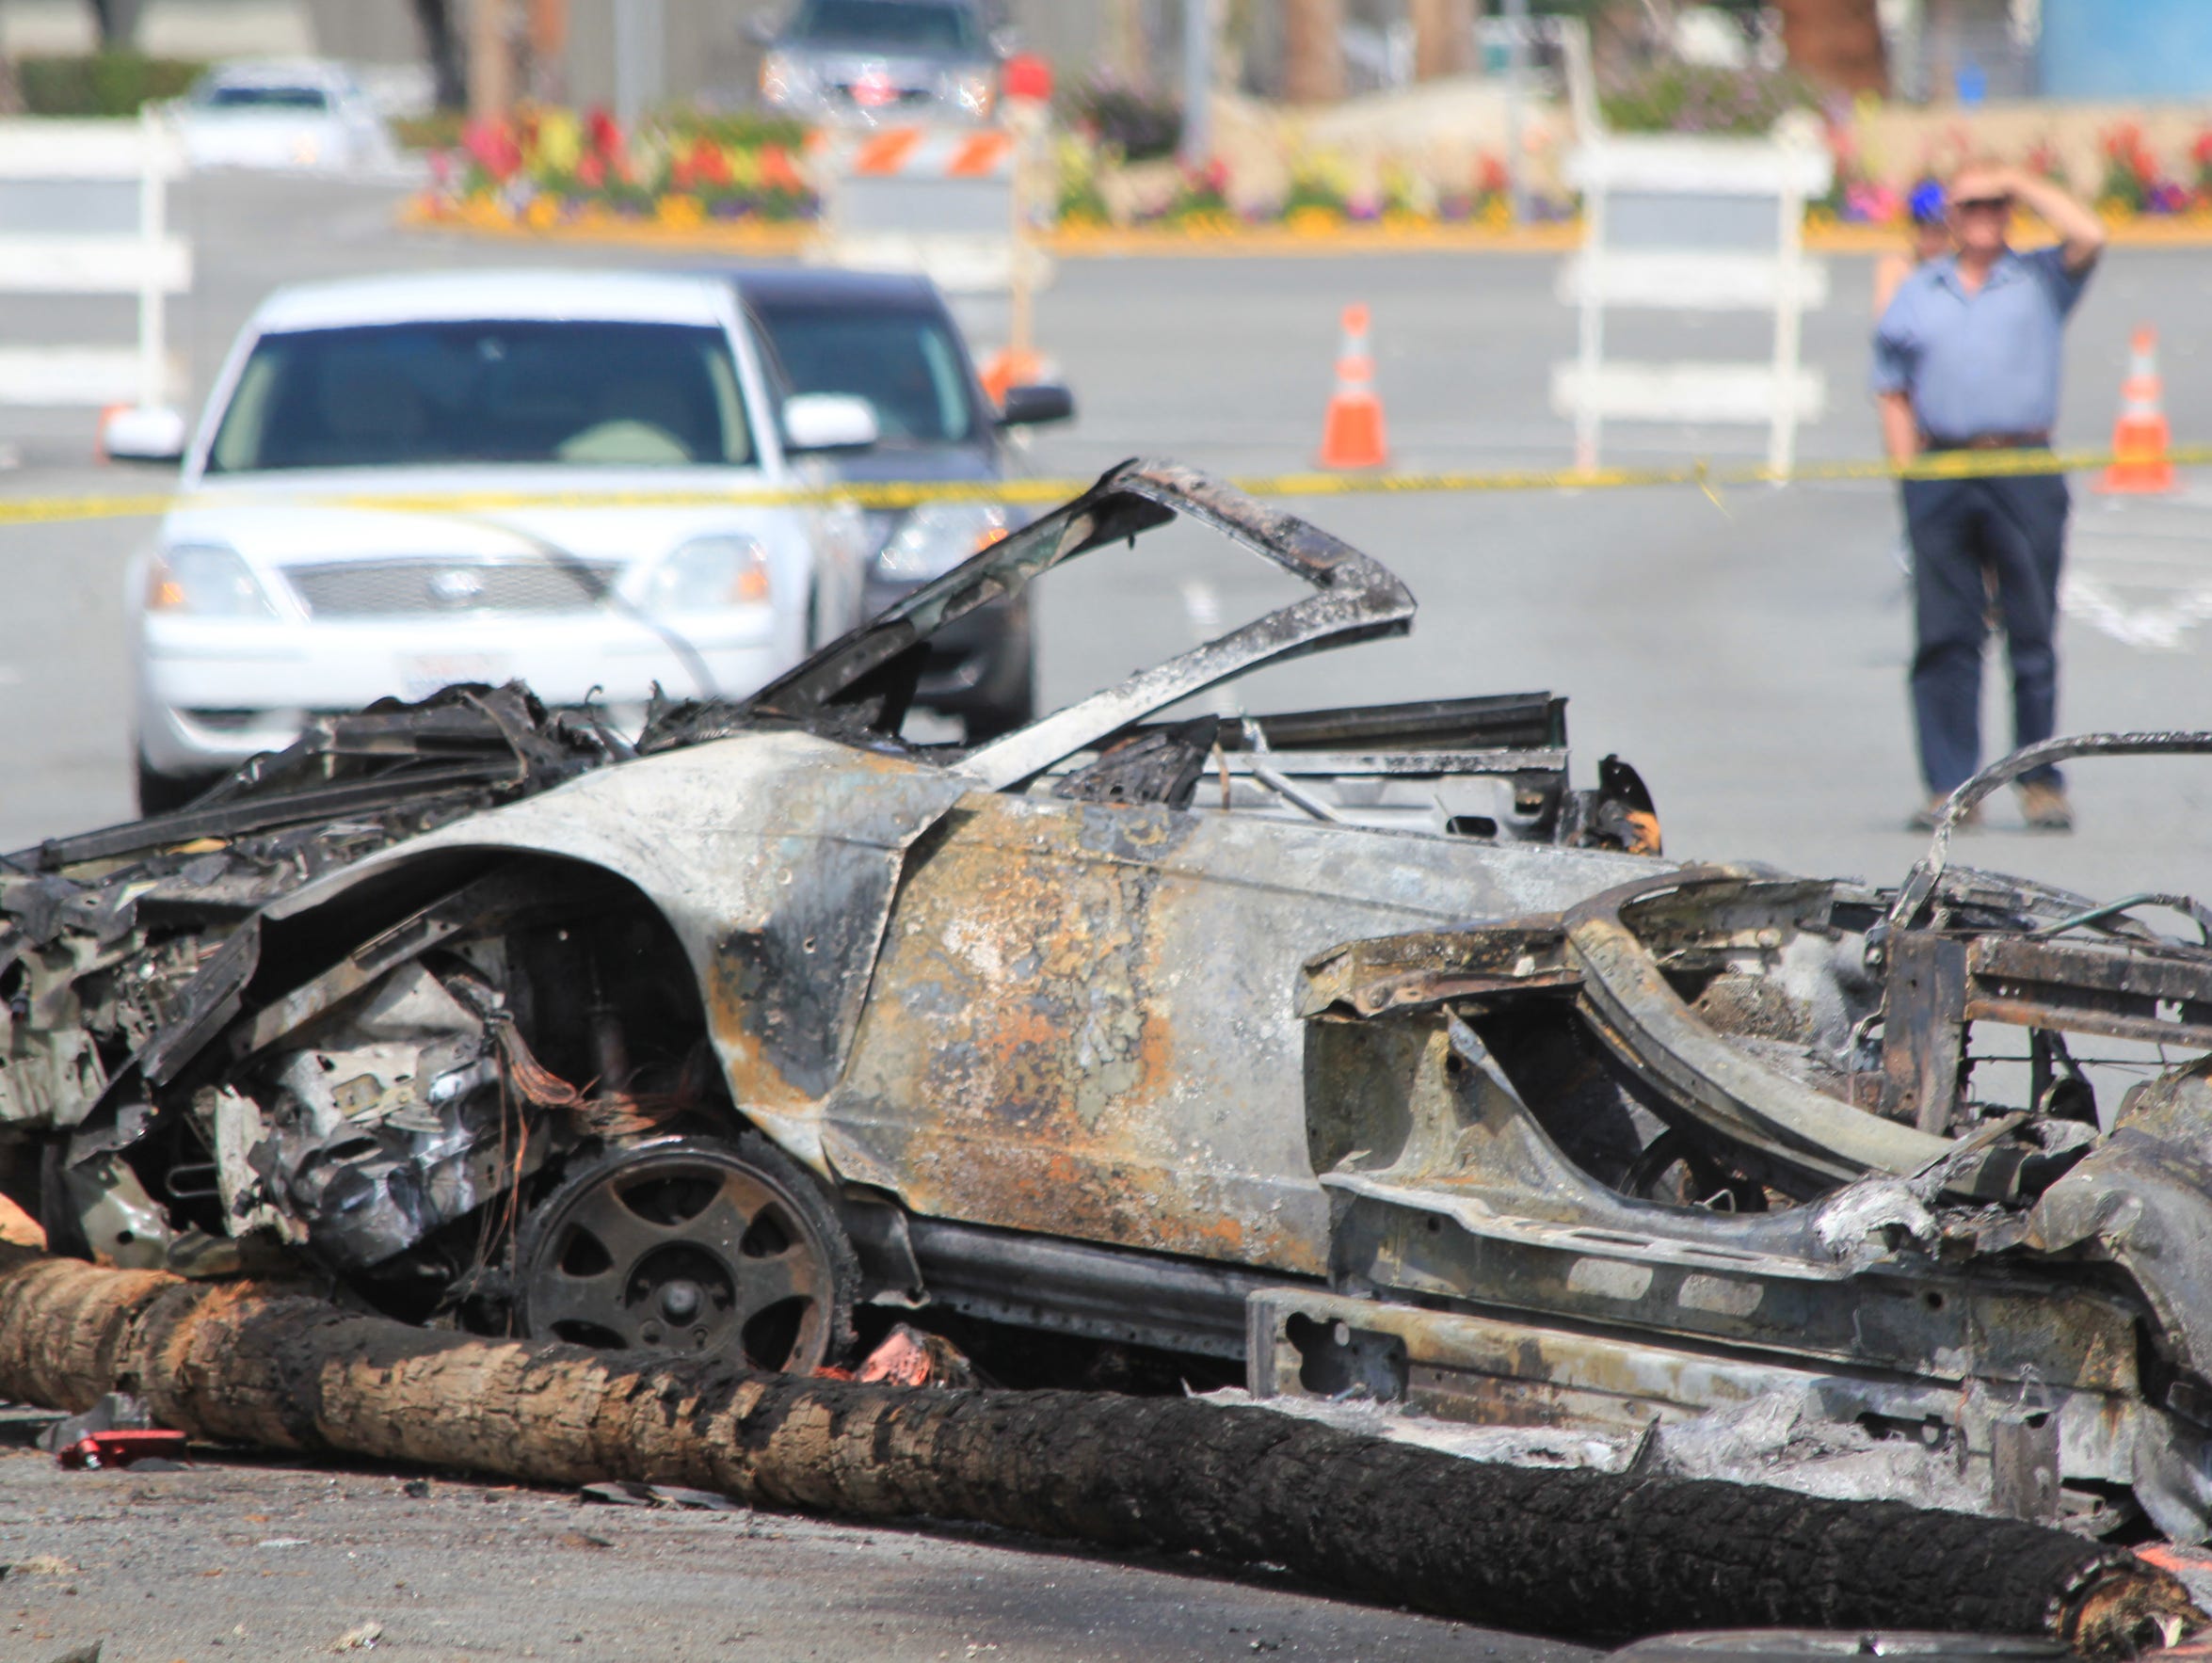 Wreckage of the chased vehicle involved in a fatal